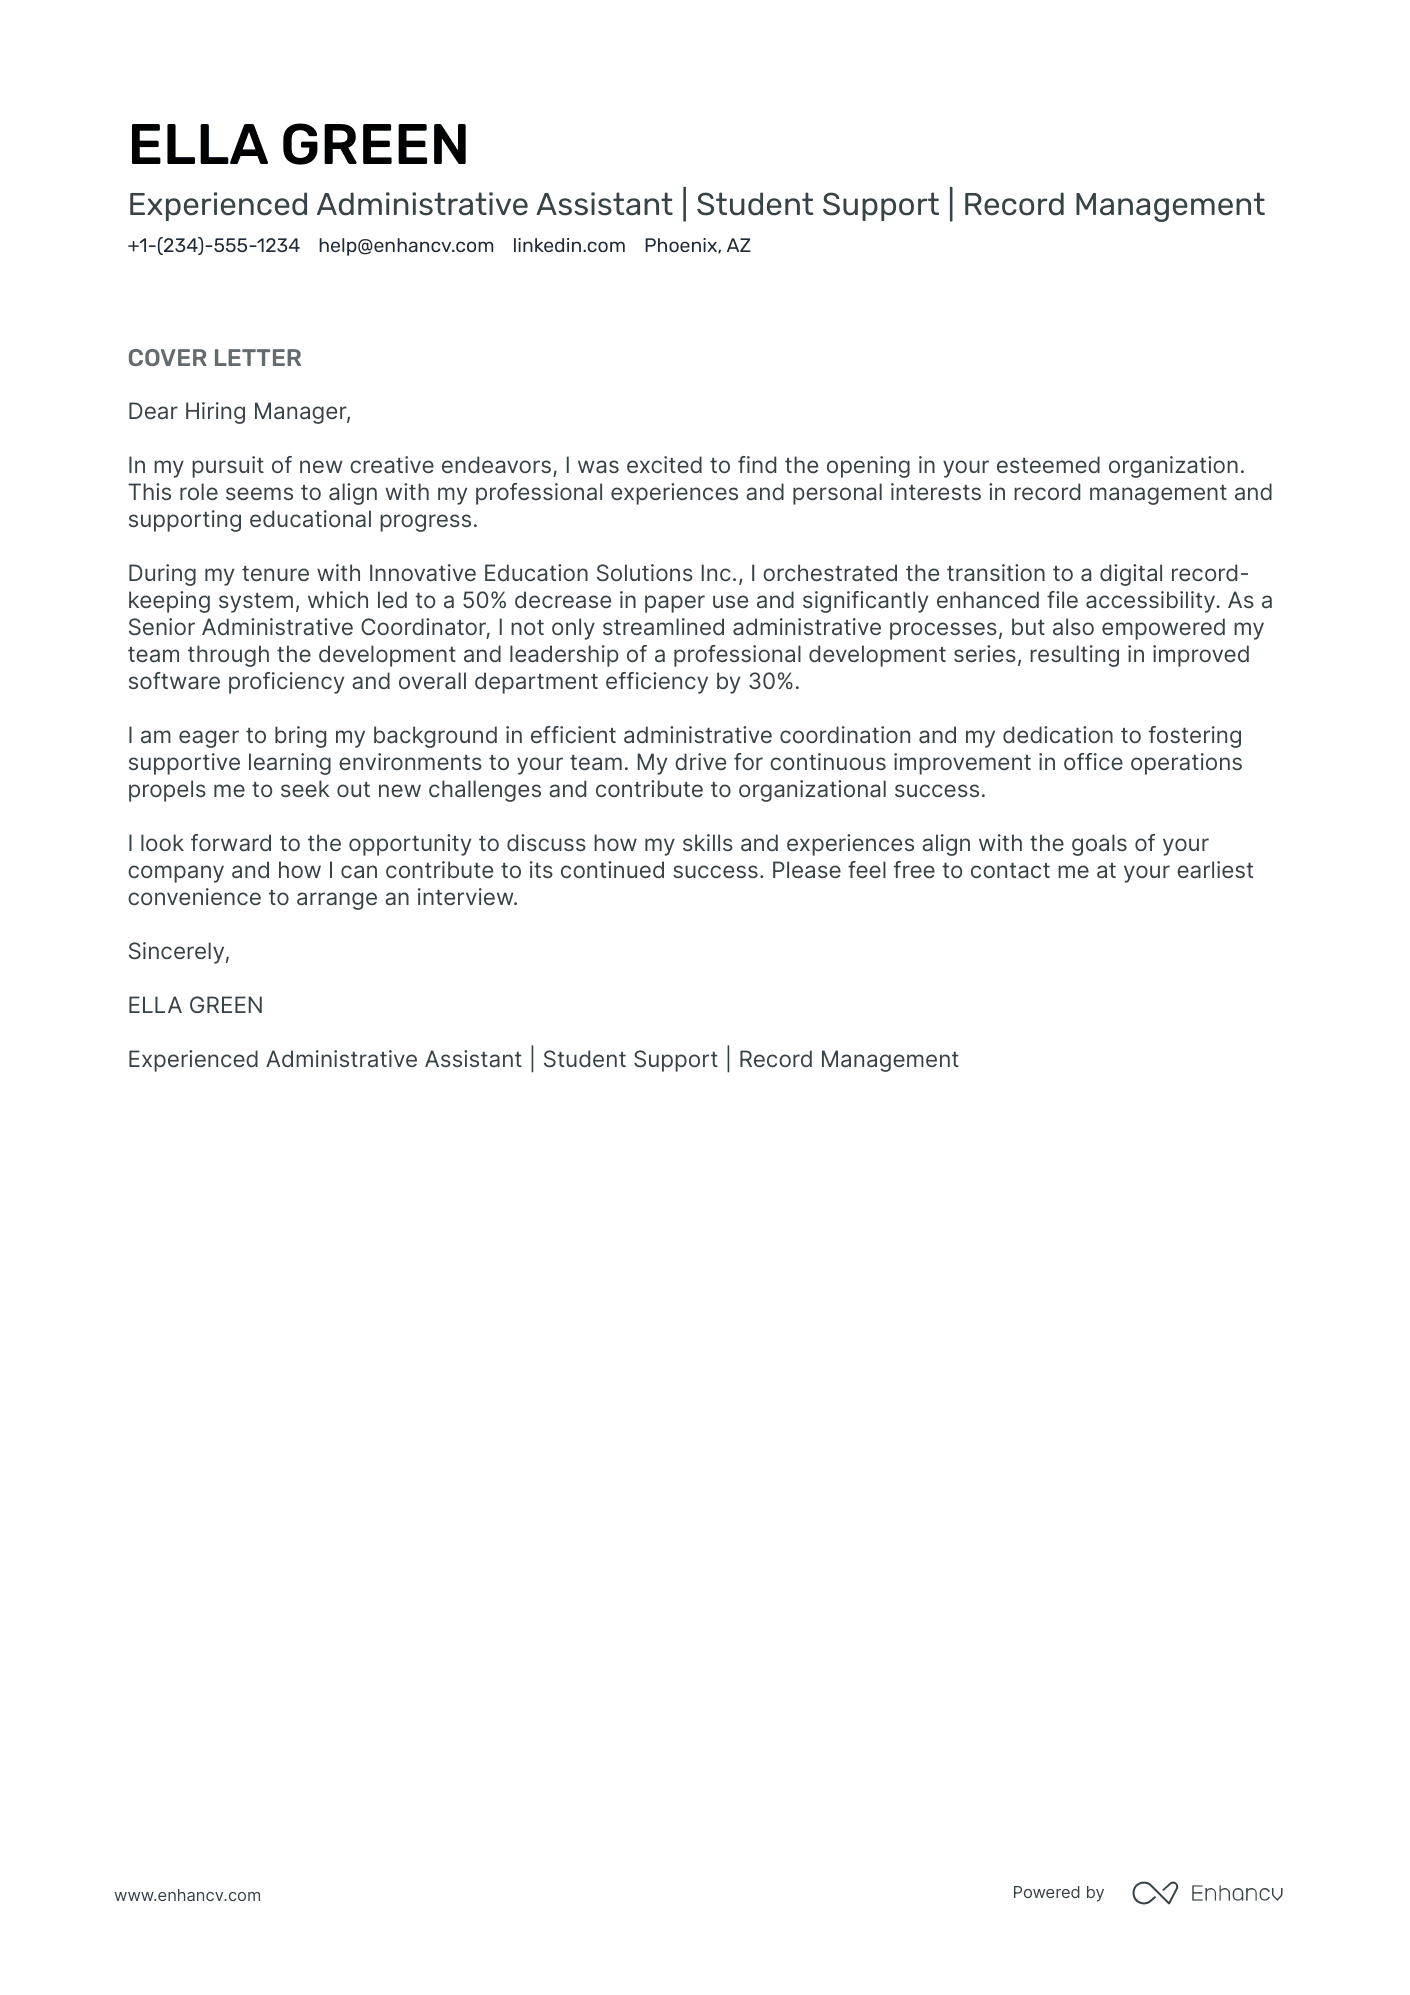 School Administrative Assistant cover letter